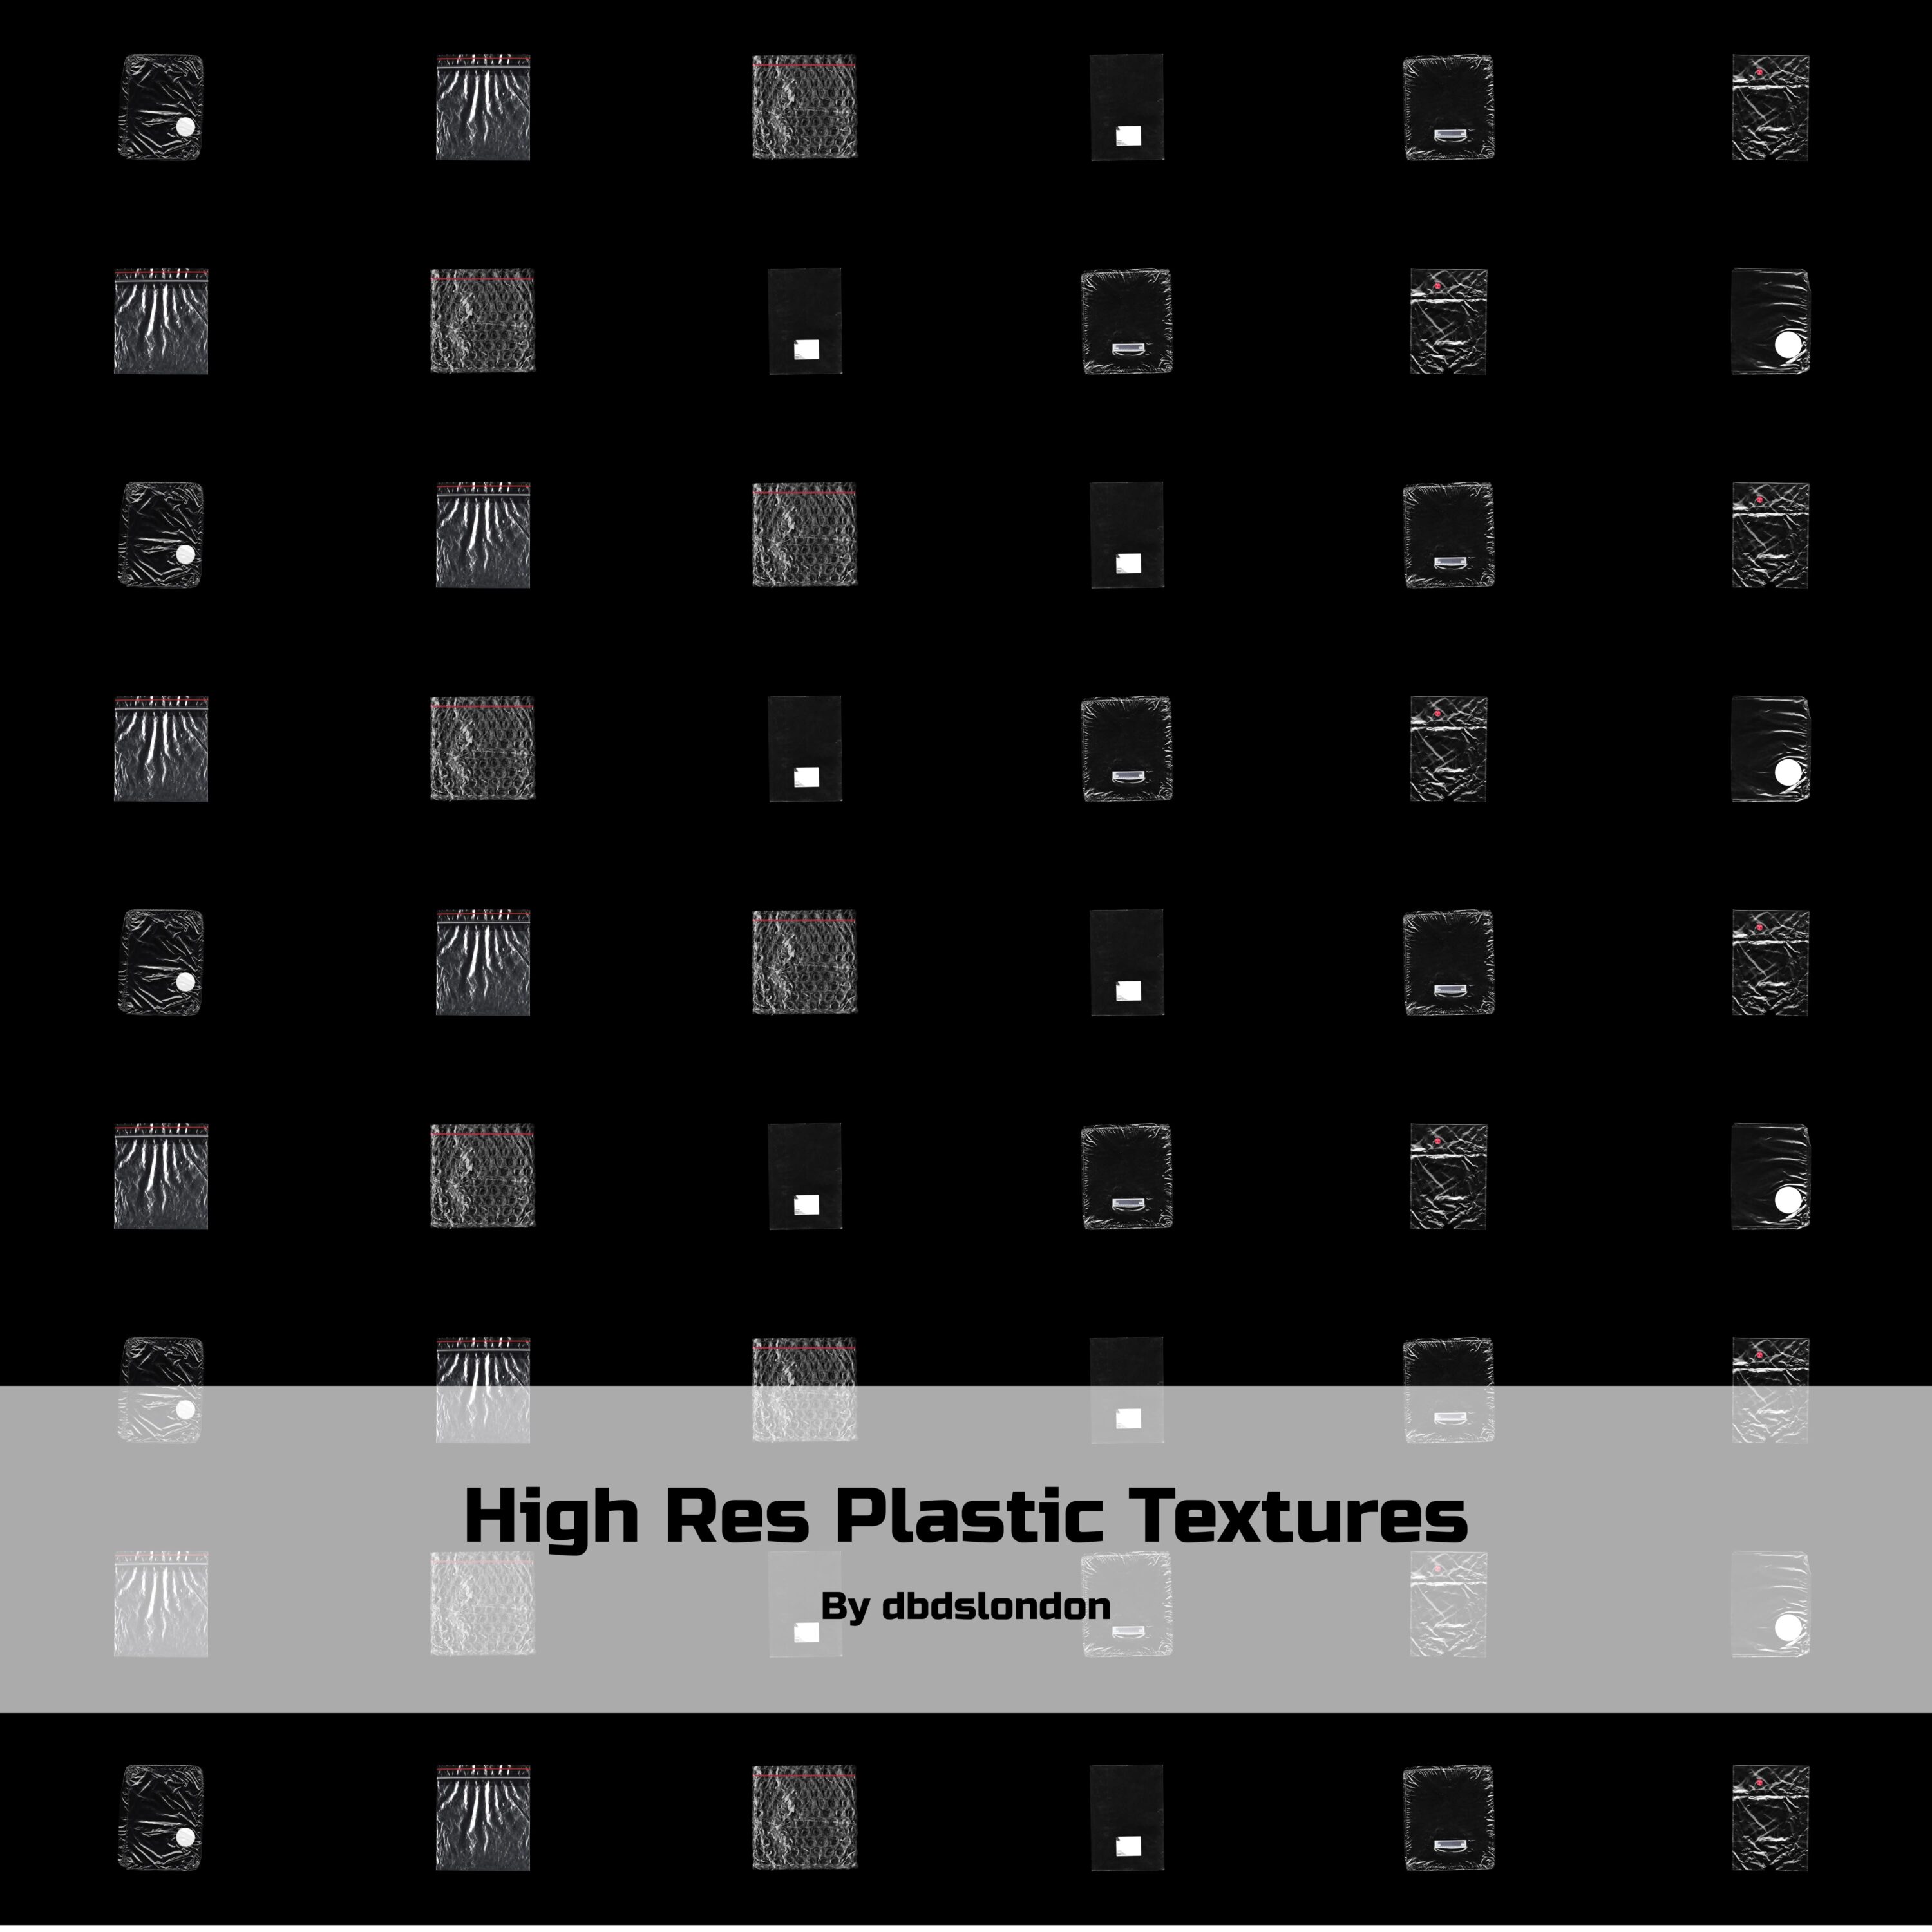 high res plastic textures.